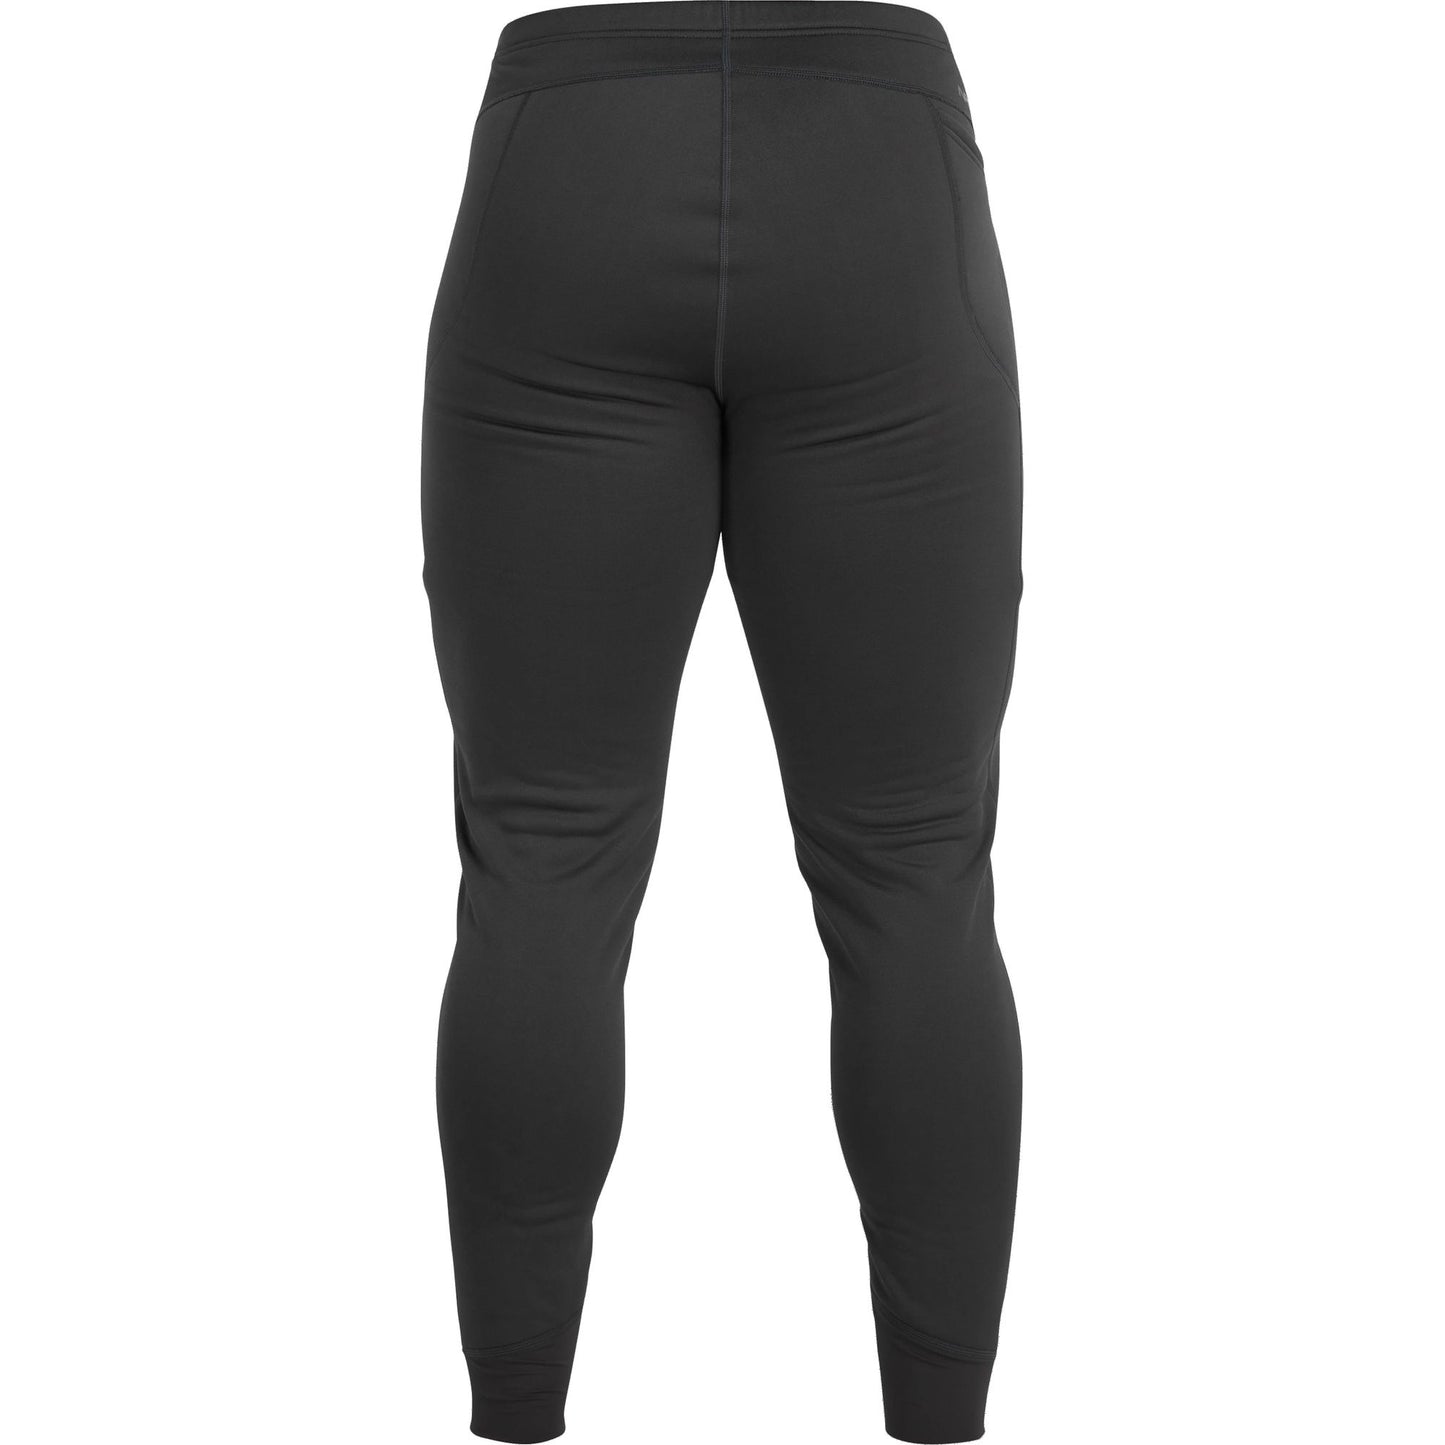 These NRS Expedition Weight Pants - Men's are perfect for layering under a cozy fleece.